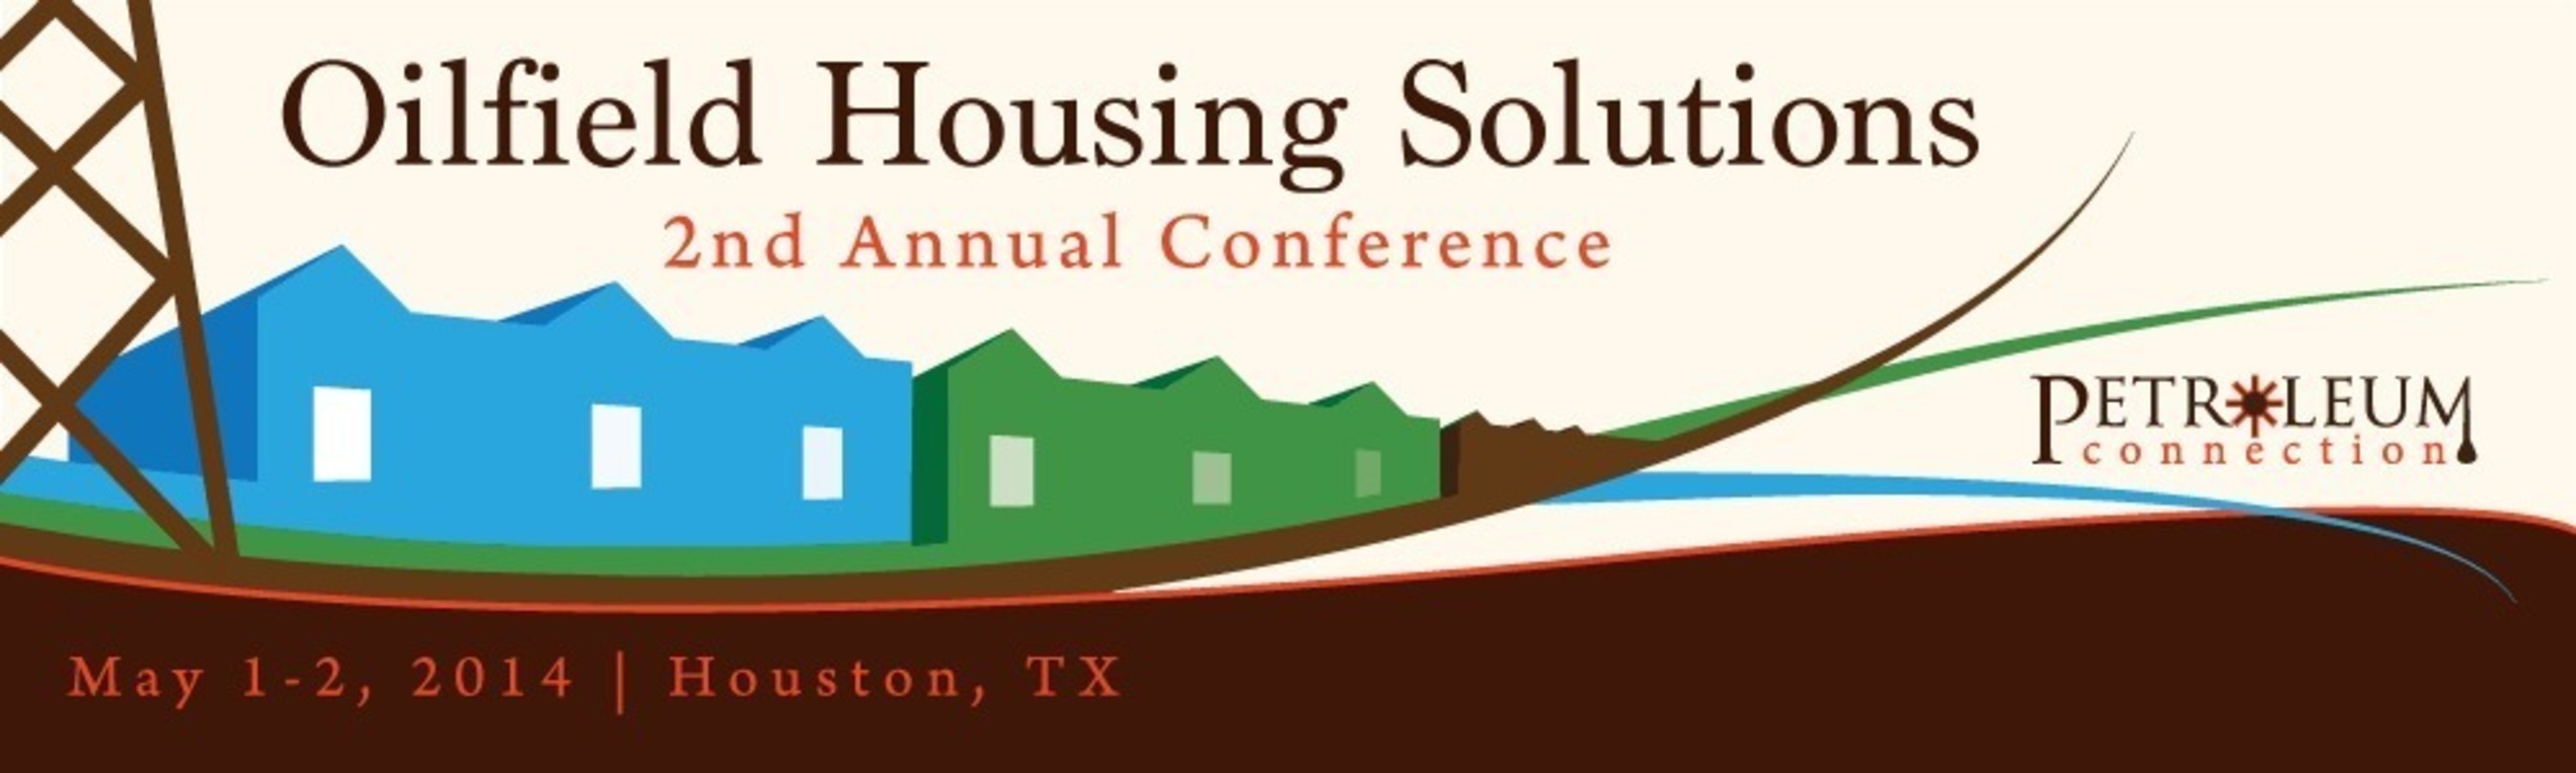 The 2nd Annual Oilfield Housing Solutions Conference  (PRNewsFoto/The Petroleum Connection)